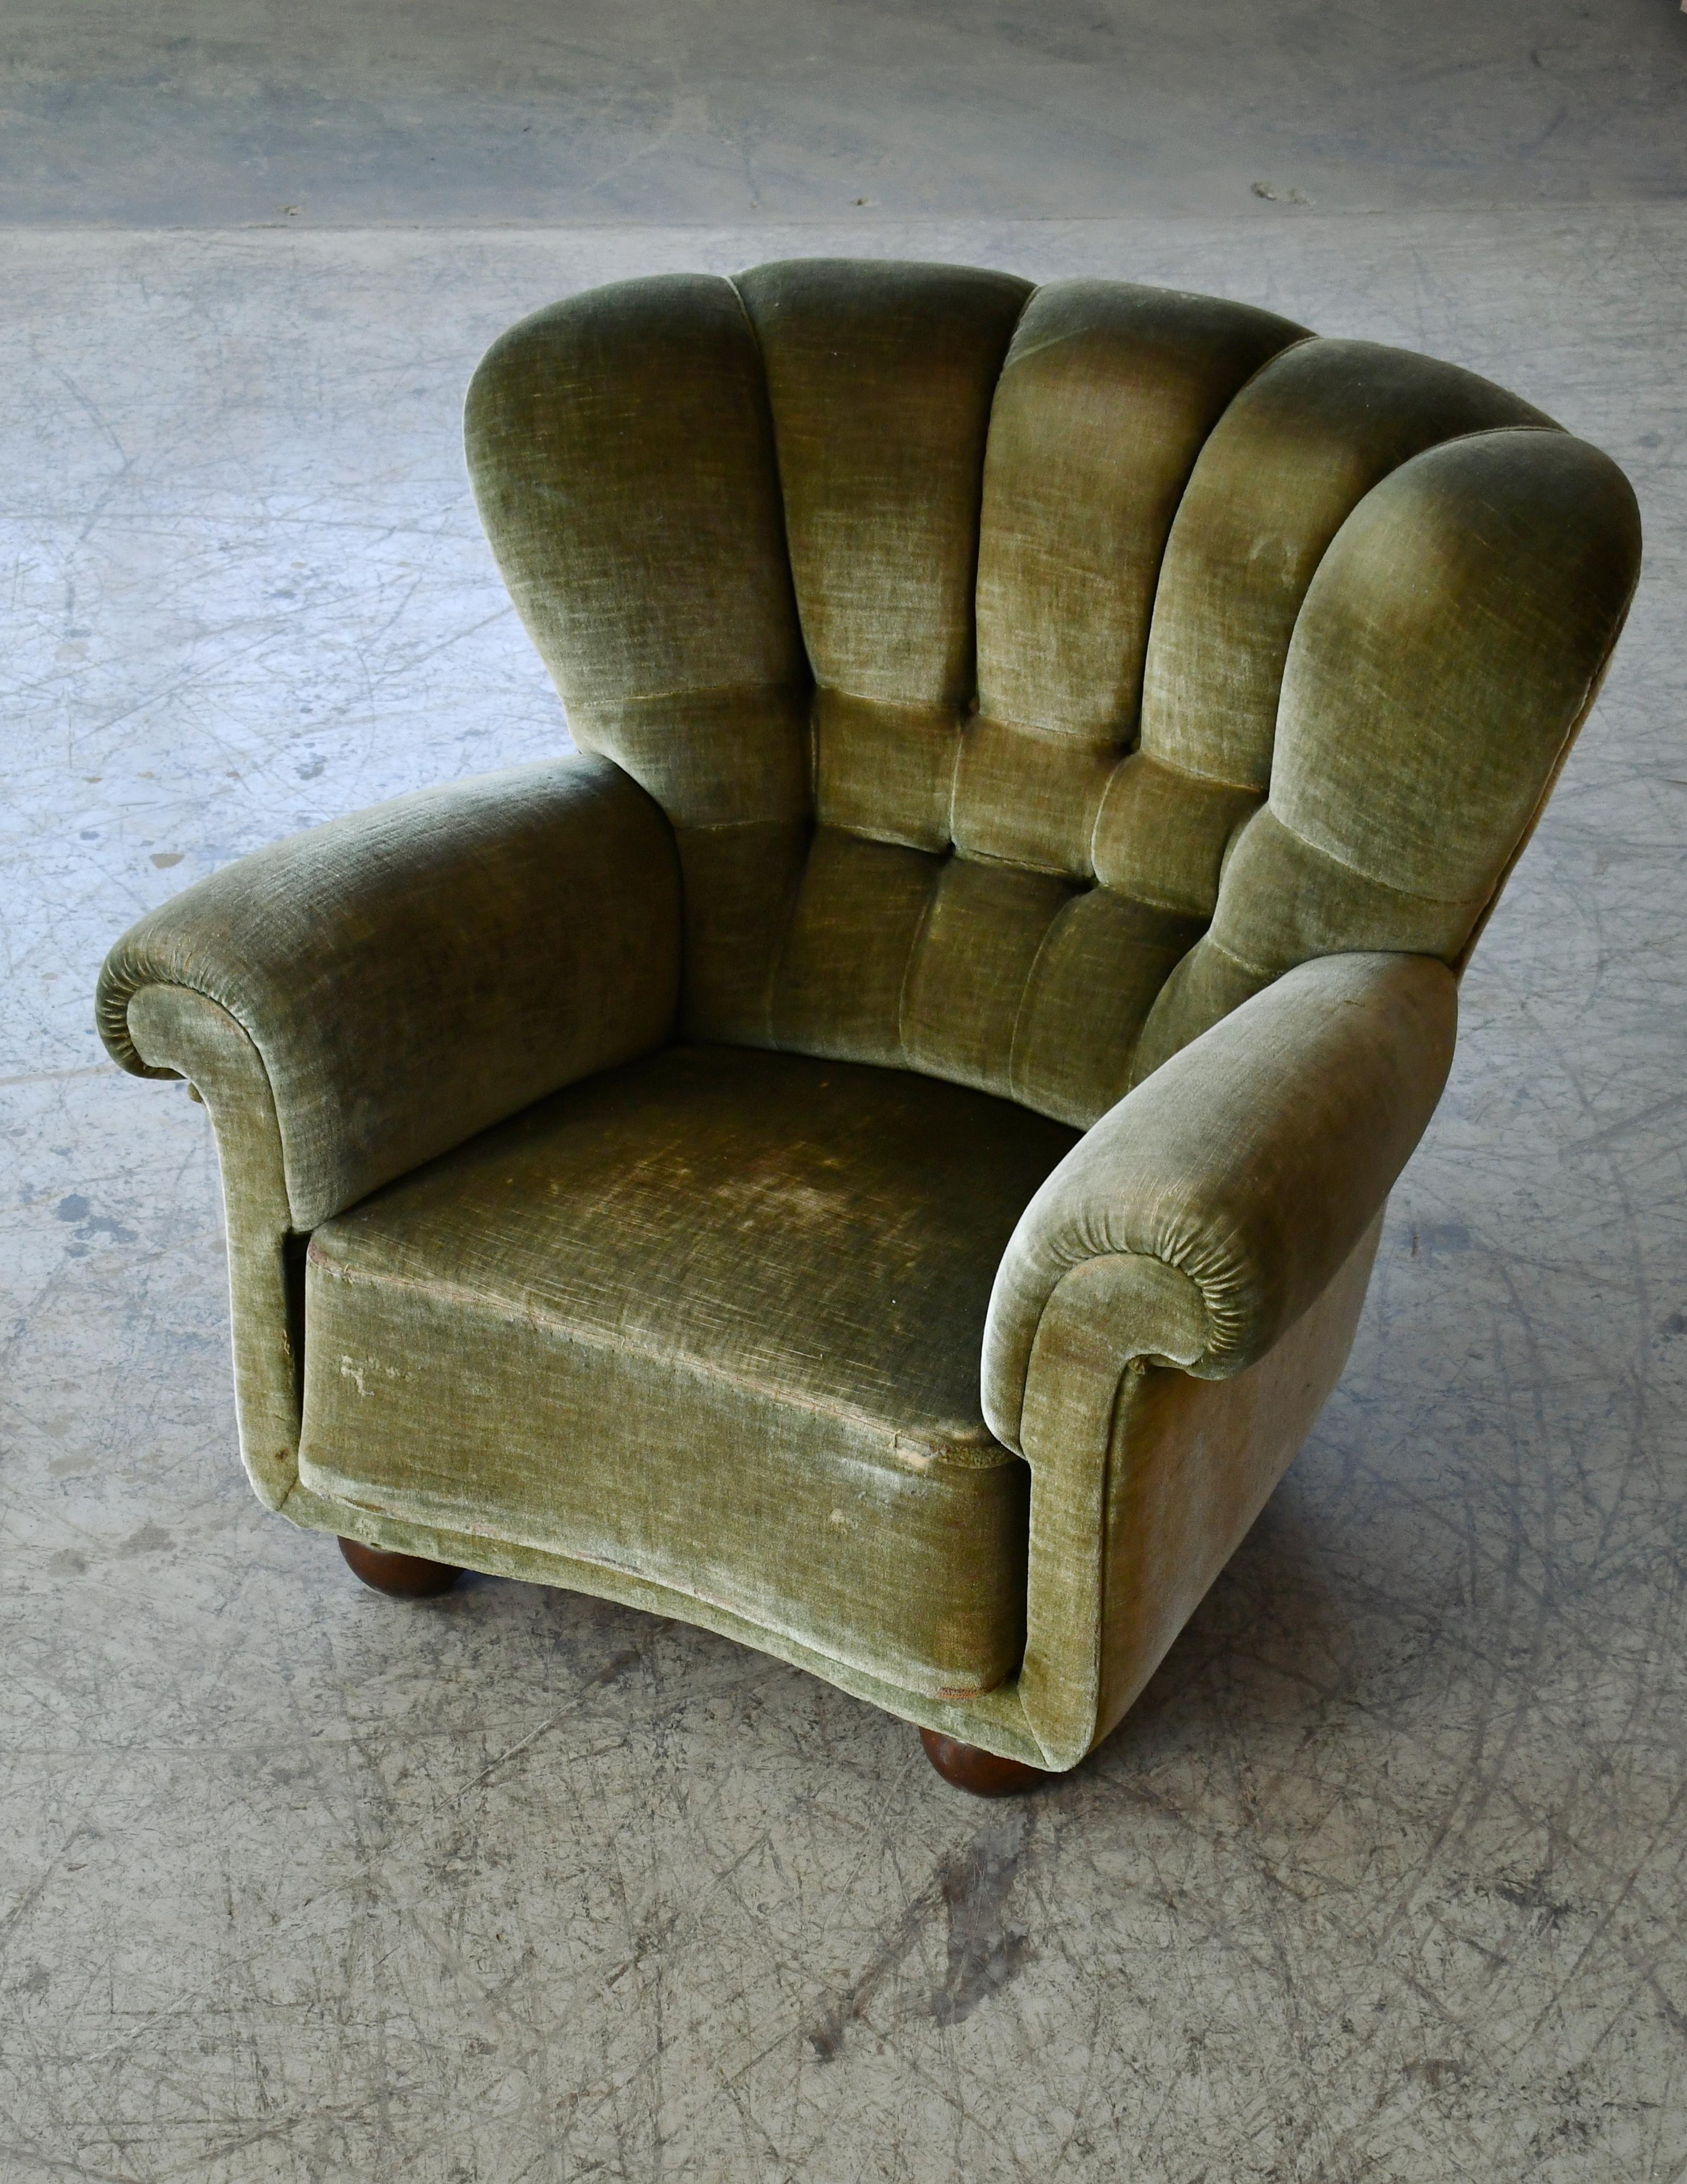 Beech Danish Large Size Club Chair in Original mohair with Channeled Backrest, 1940's For Sale